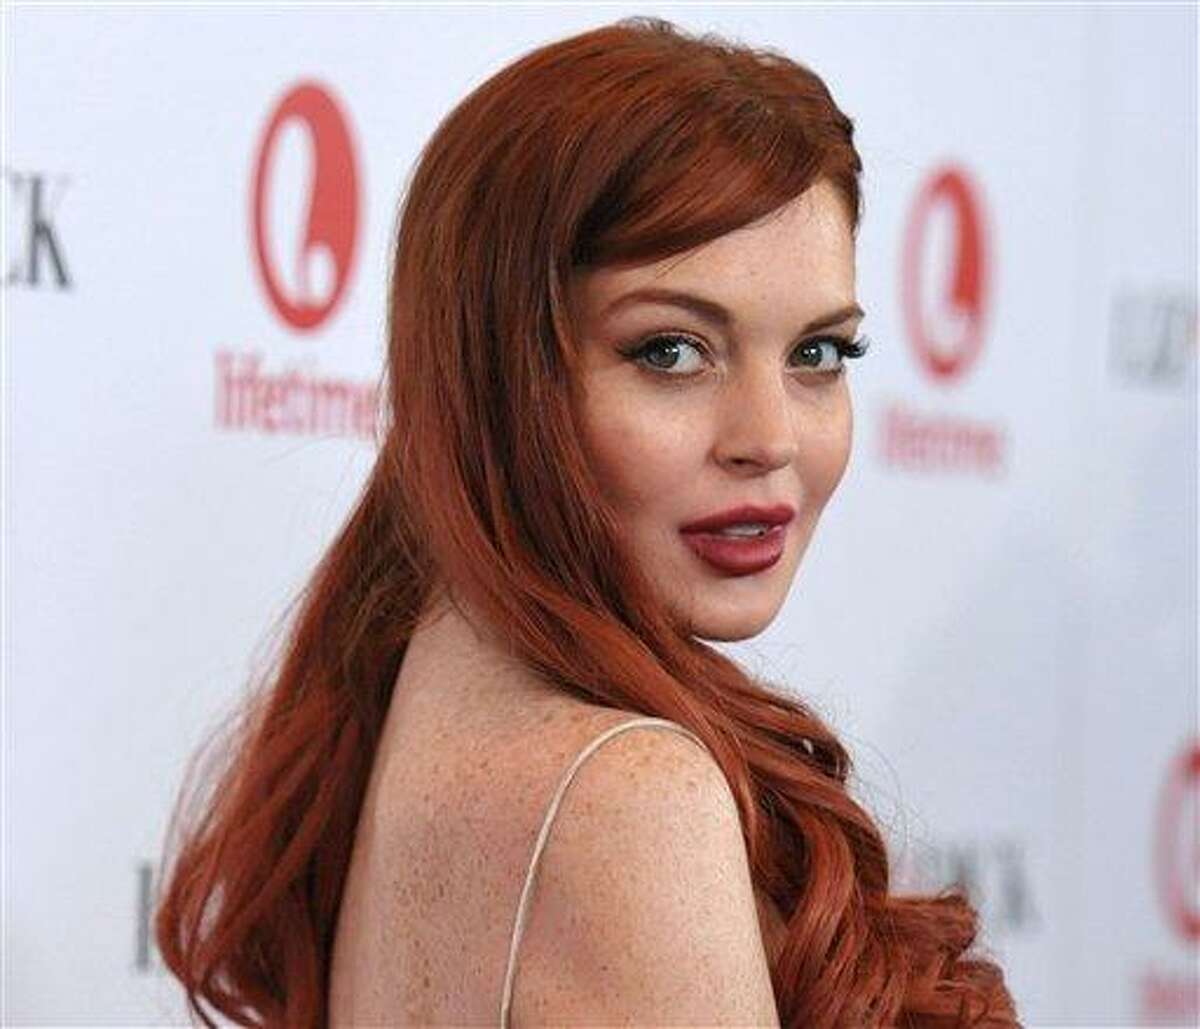 Lindsay Lohan attends a dinner celebrating the premiere of "Liz & Dick" at the Beverly Hills Hotel in Beverly Hills, Calif. Lohan is under arrest and charged with third-degree assault Thursday after police say she hit a woman during an argument at a New York City nightclub. Photo by John Shearer/Invision/AP